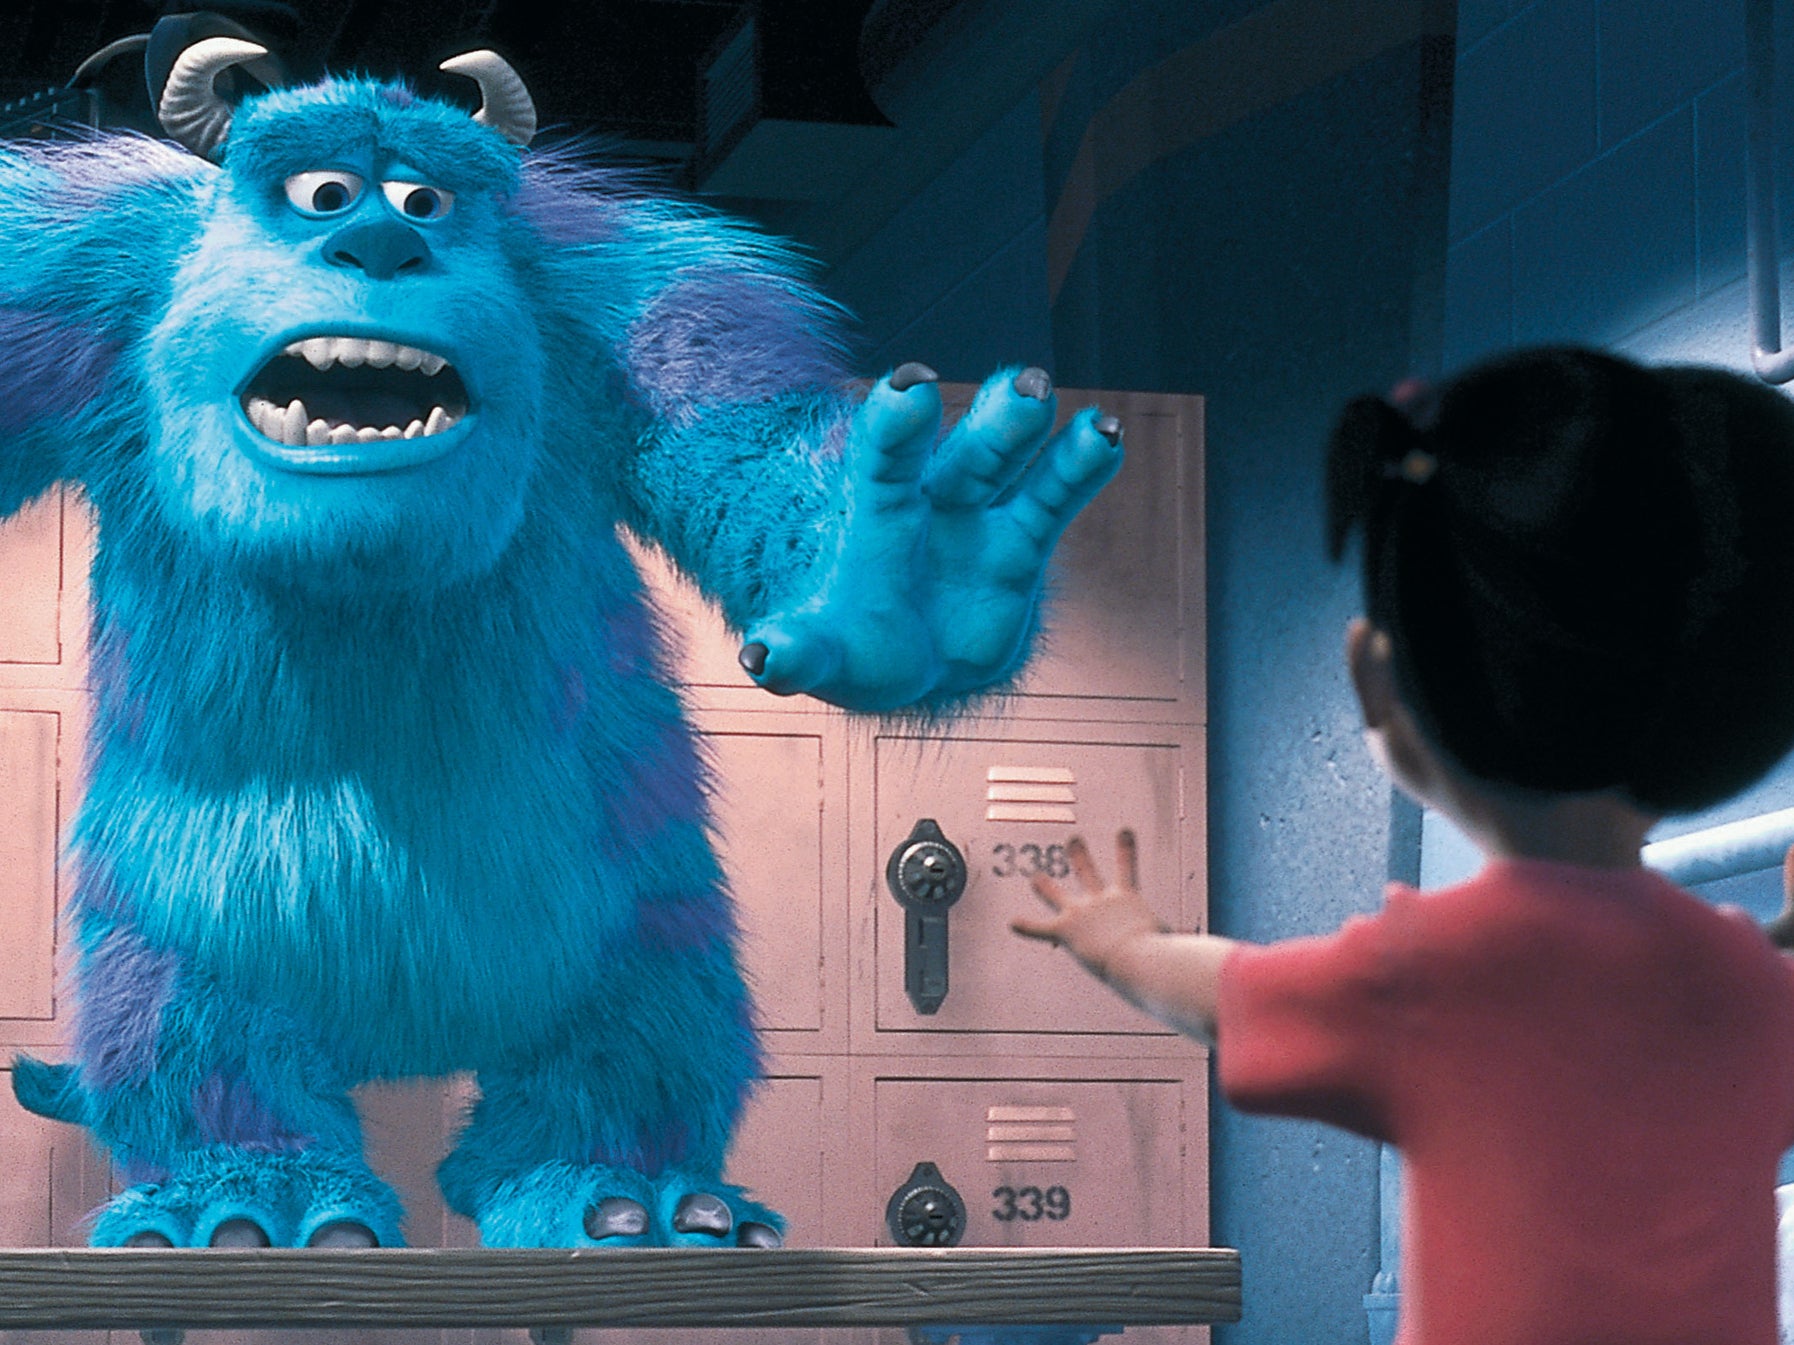 Sulley and Boo in ‘Monsters, Inc'